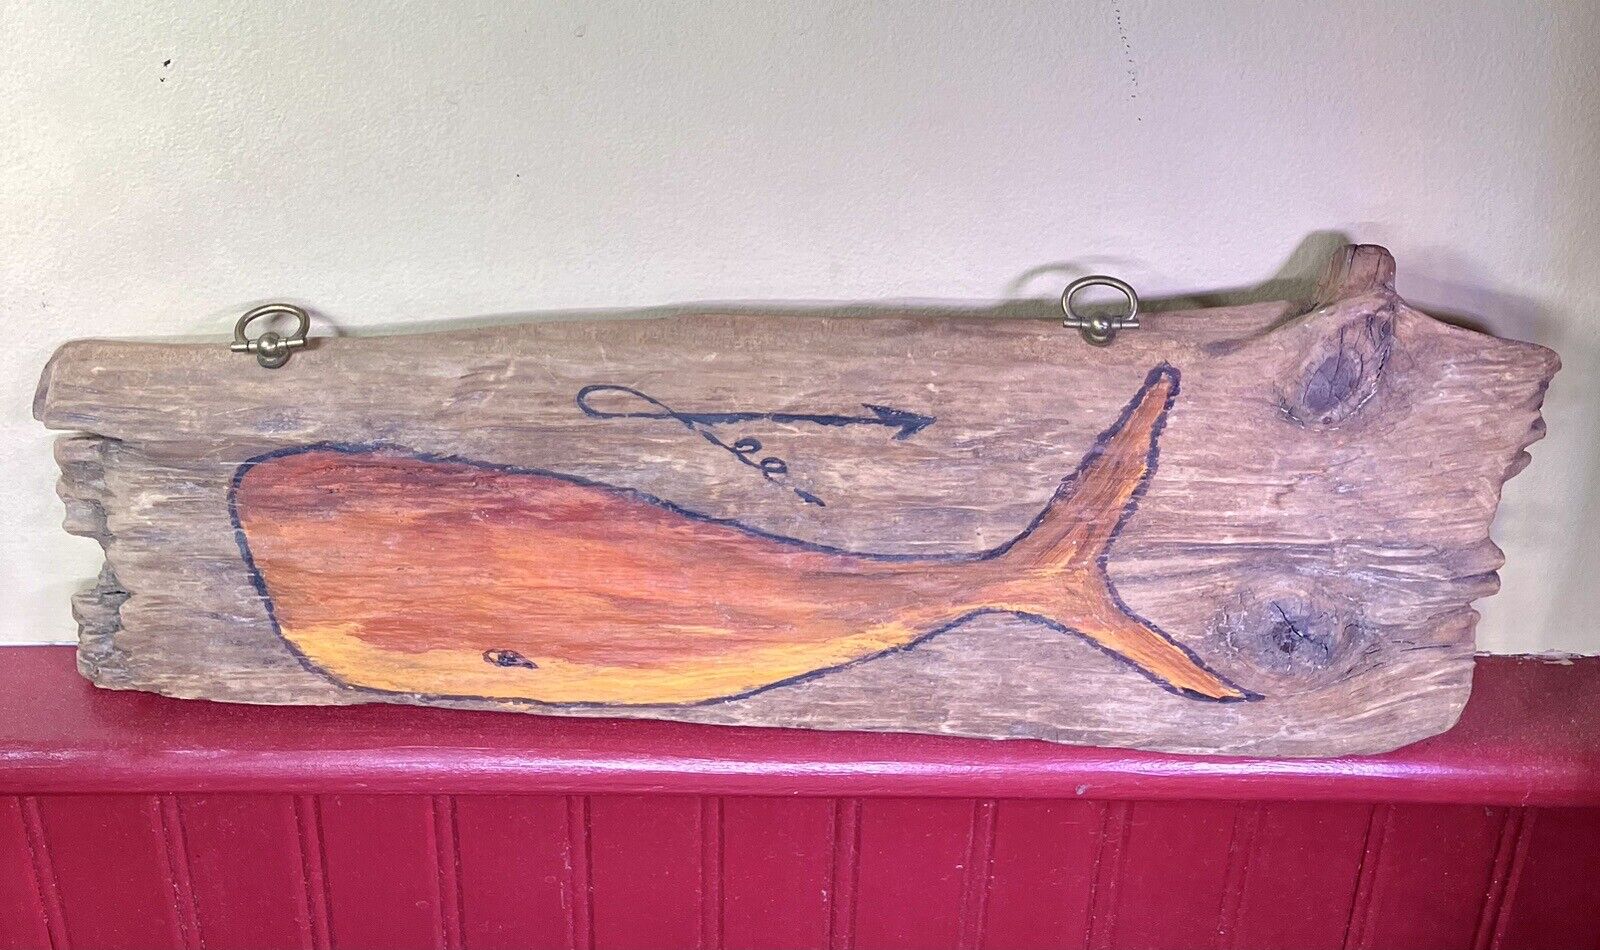 Driftwood with Orange Painted Whale Signed by Lee bought on CapeCod Wonderful